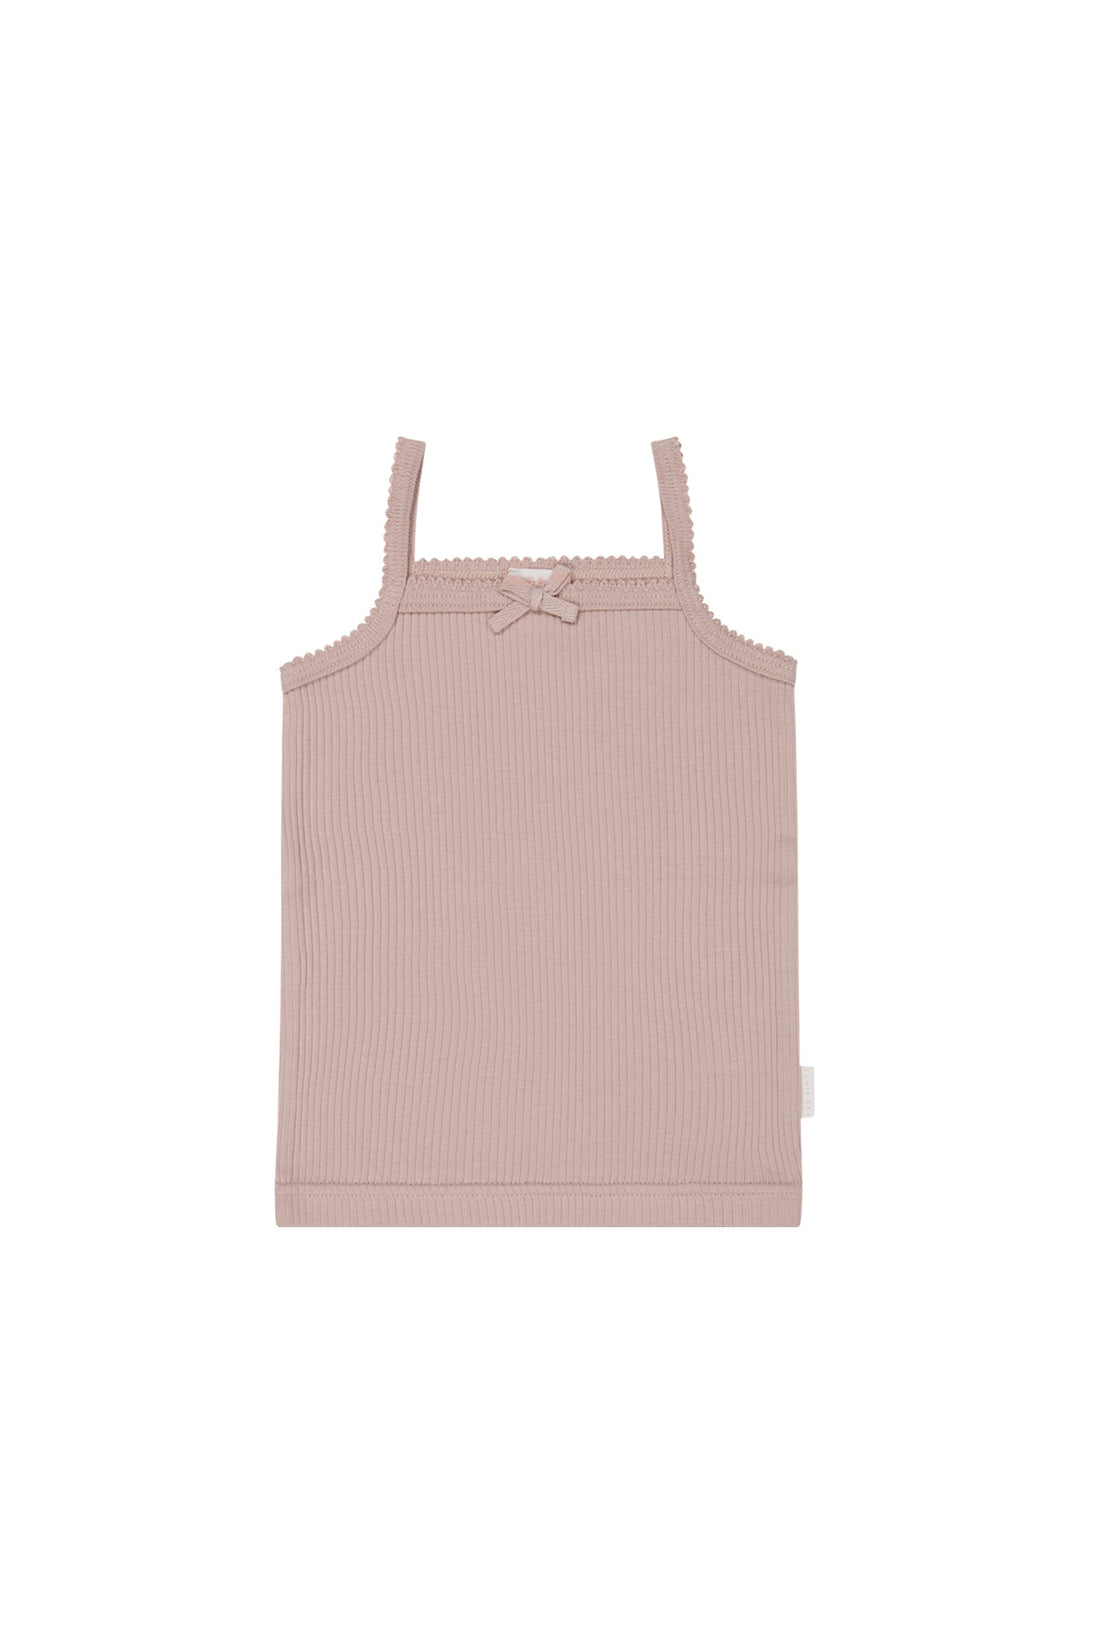 Organic Cotton Modal Singlet - Provence Dusty Pink Childrens Singlet from Jamie Kay USA